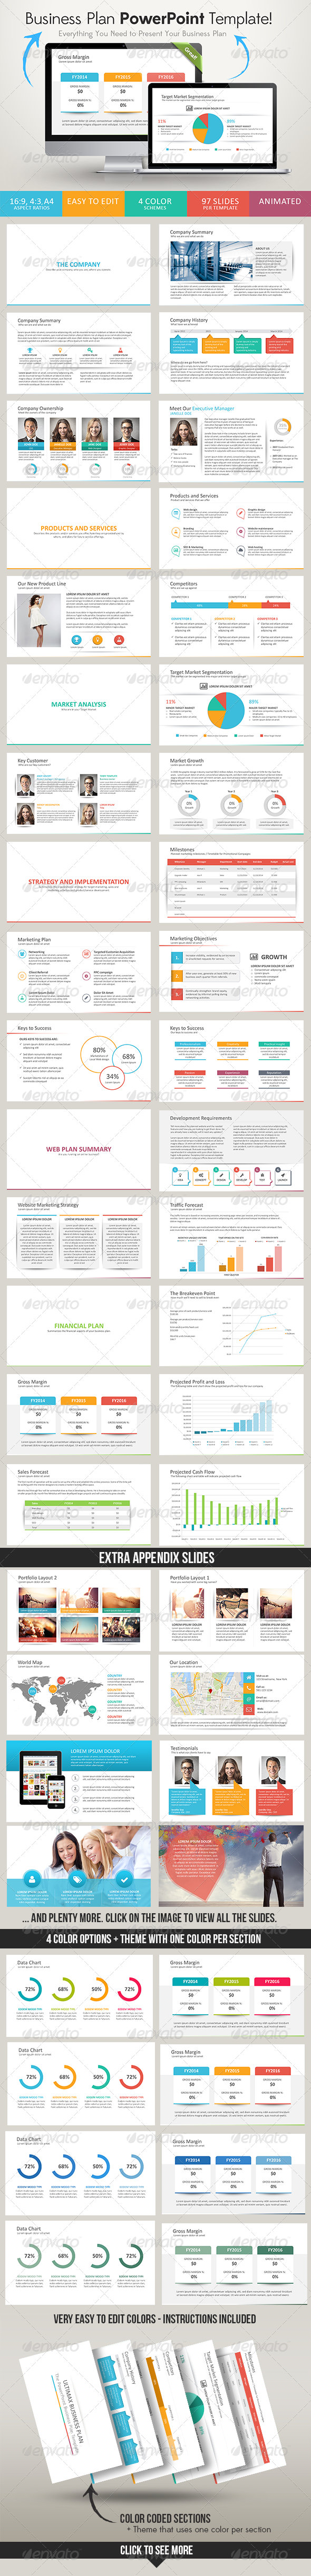 Ultimax Business Plan PowerPoint Template